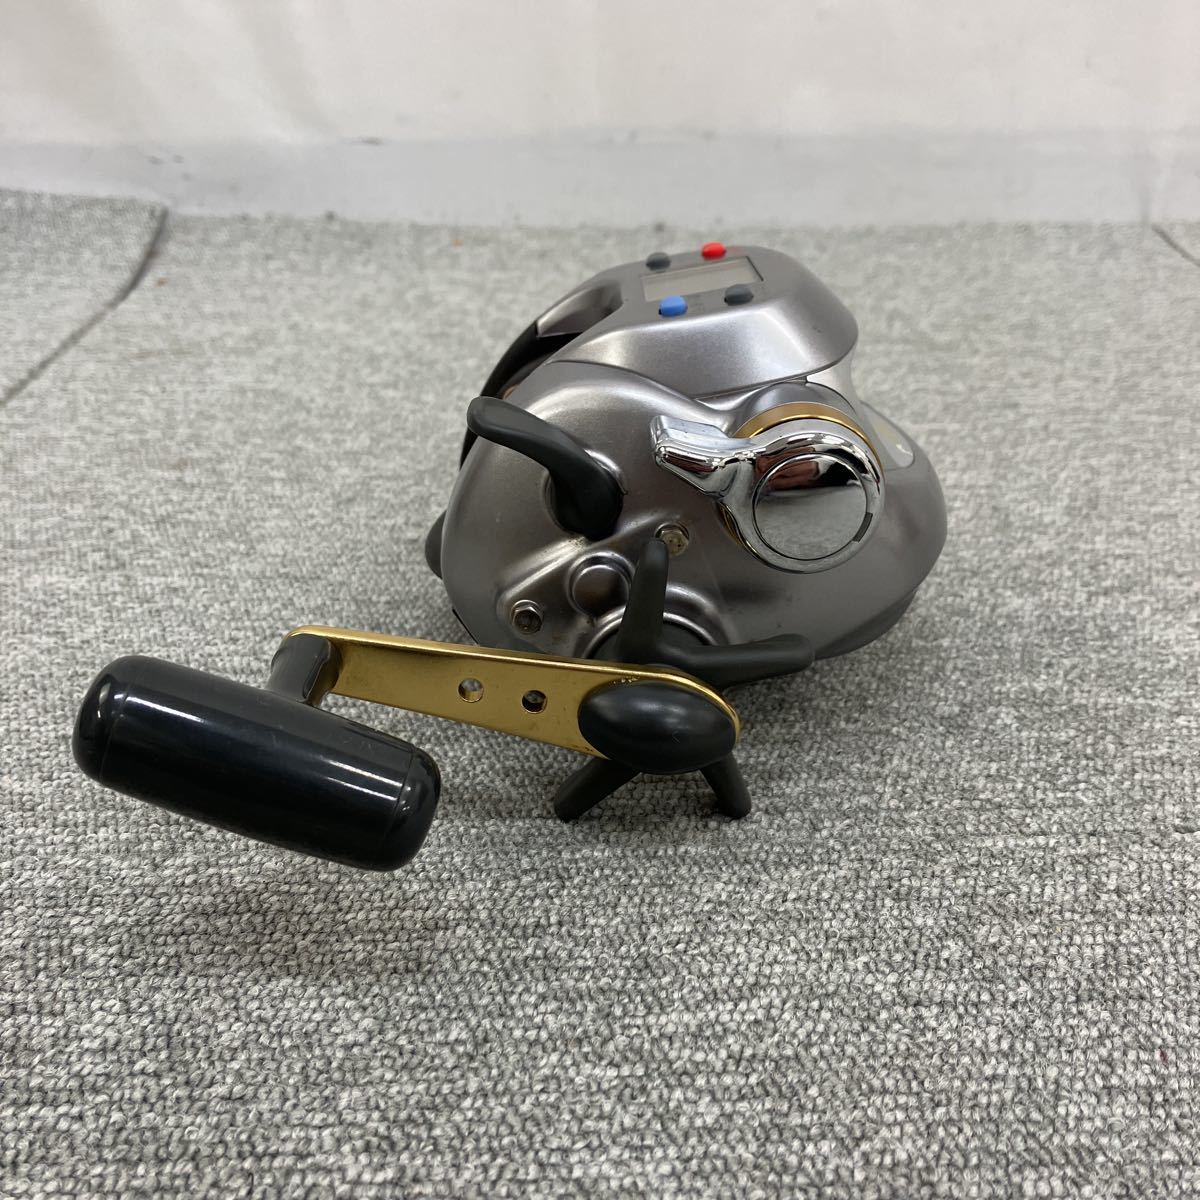 selling out ]DAIWA Daiwa electric reel 801363 HYPER TANACOM 500e hyper tana  Conley ru for boat PE 5 number -300m 6 number -250m code attaching : Real  Yahoo auction salling